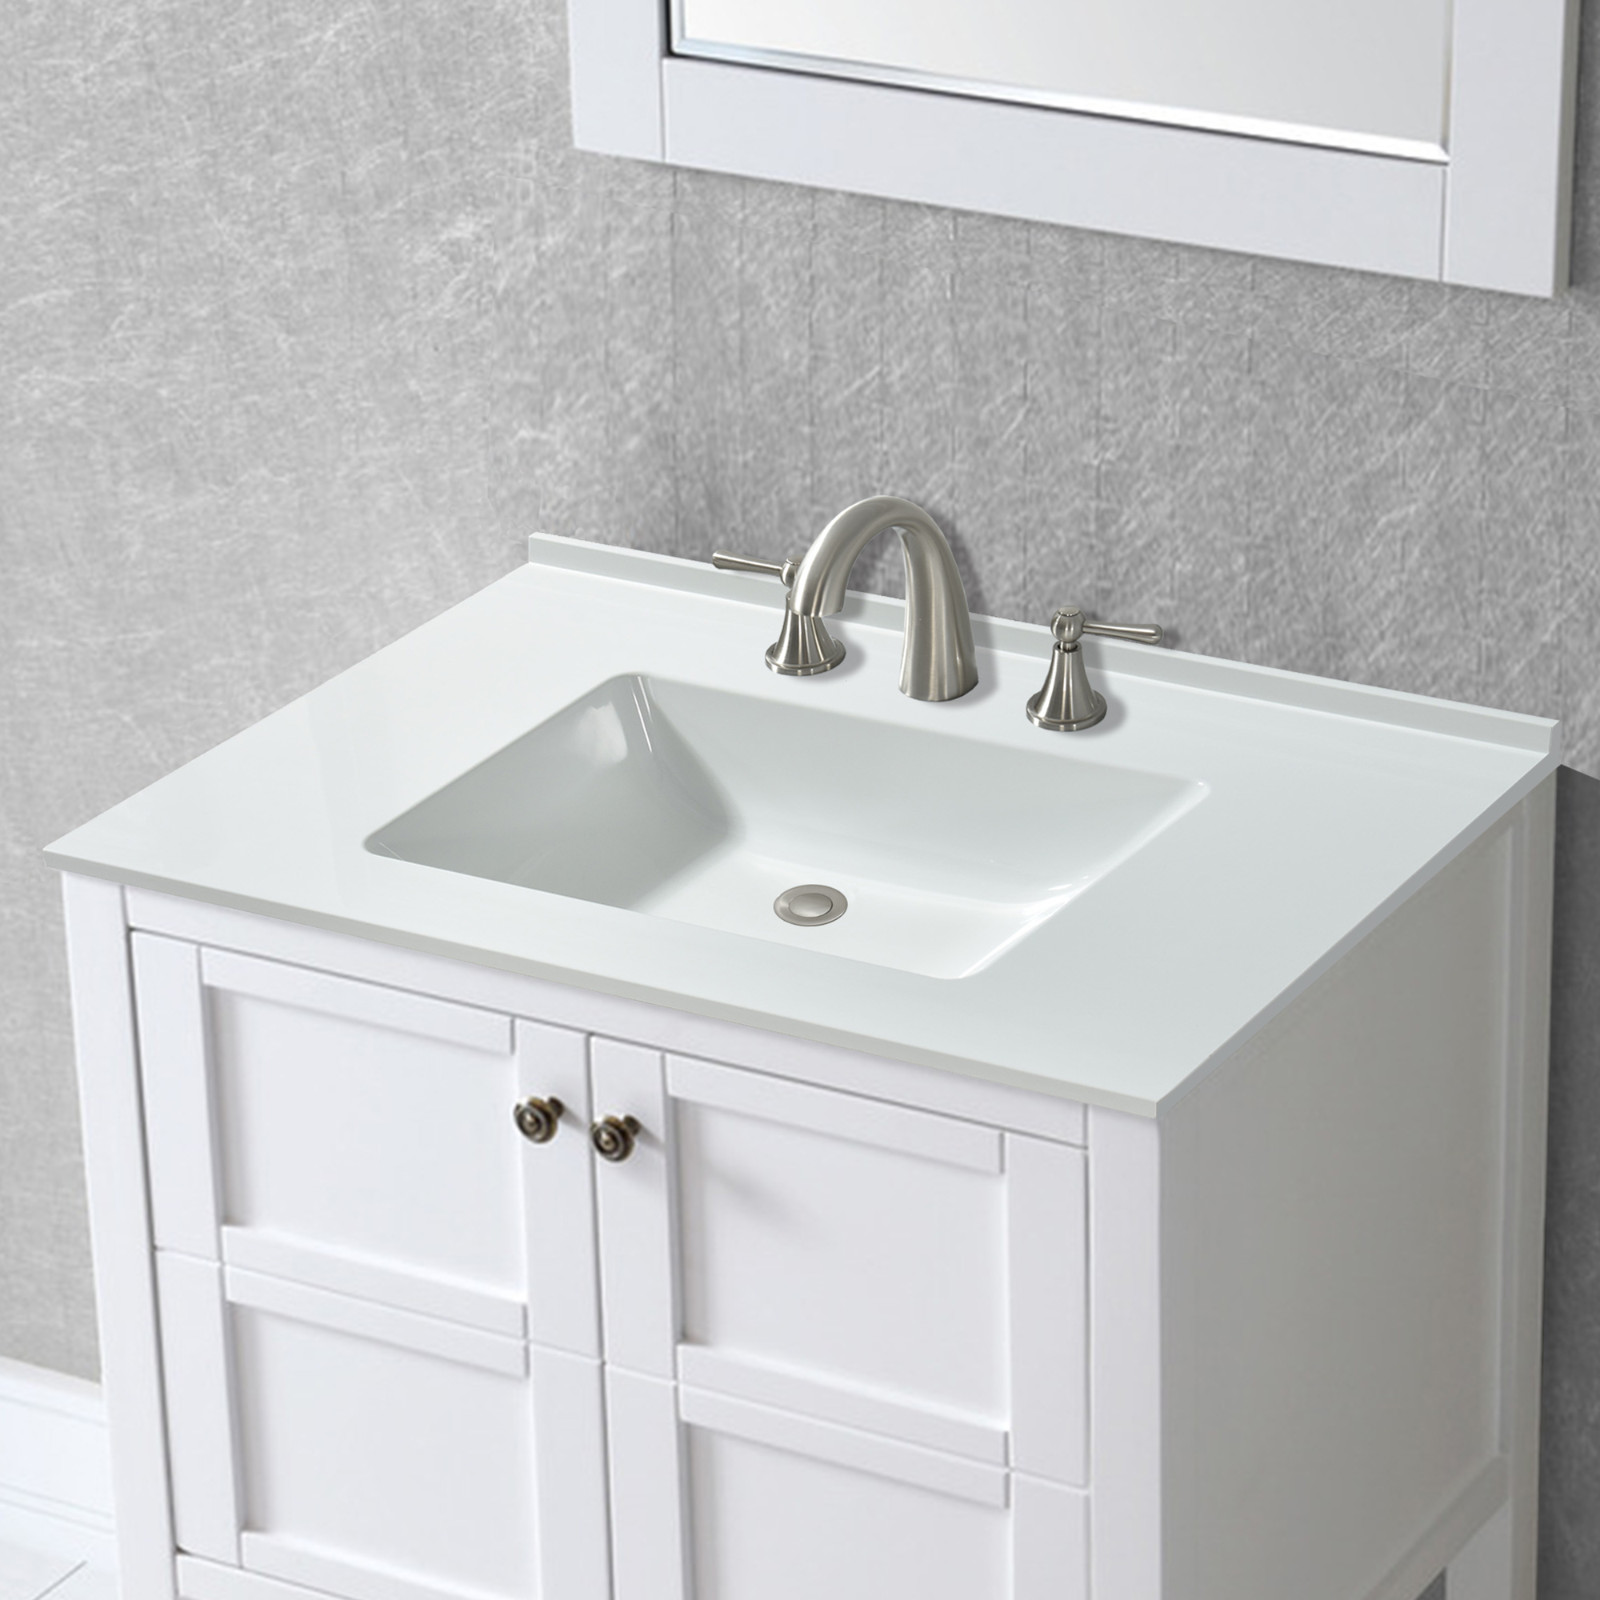  WOODBRIDGE VT3119-1000 Solid Surface Vanity Top with with Intergrated Sink and 3 Faucet Holes for 4-Inch Centerset Faucet, 31